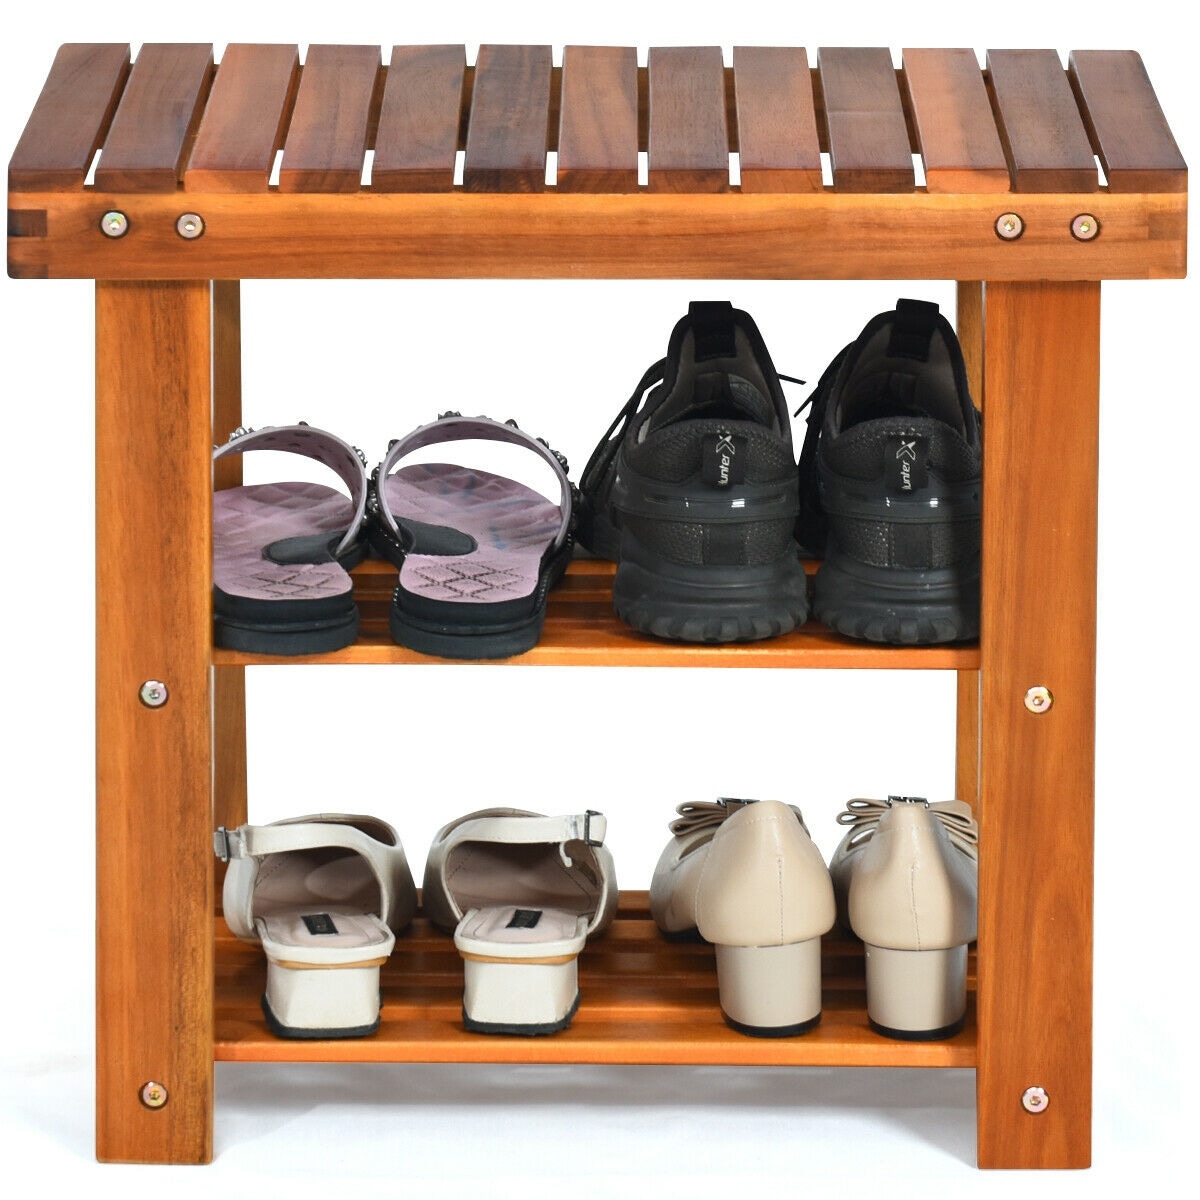 https://ak1.ostkcdn.com/images/products/is/images/direct/cdbaf8ea0d35c7089bf7dfcd2b5574a603175224/3-Tier-Wood-Shoe-Rack-19%27-Shoe-Bench-Boots-Organizer.jpg